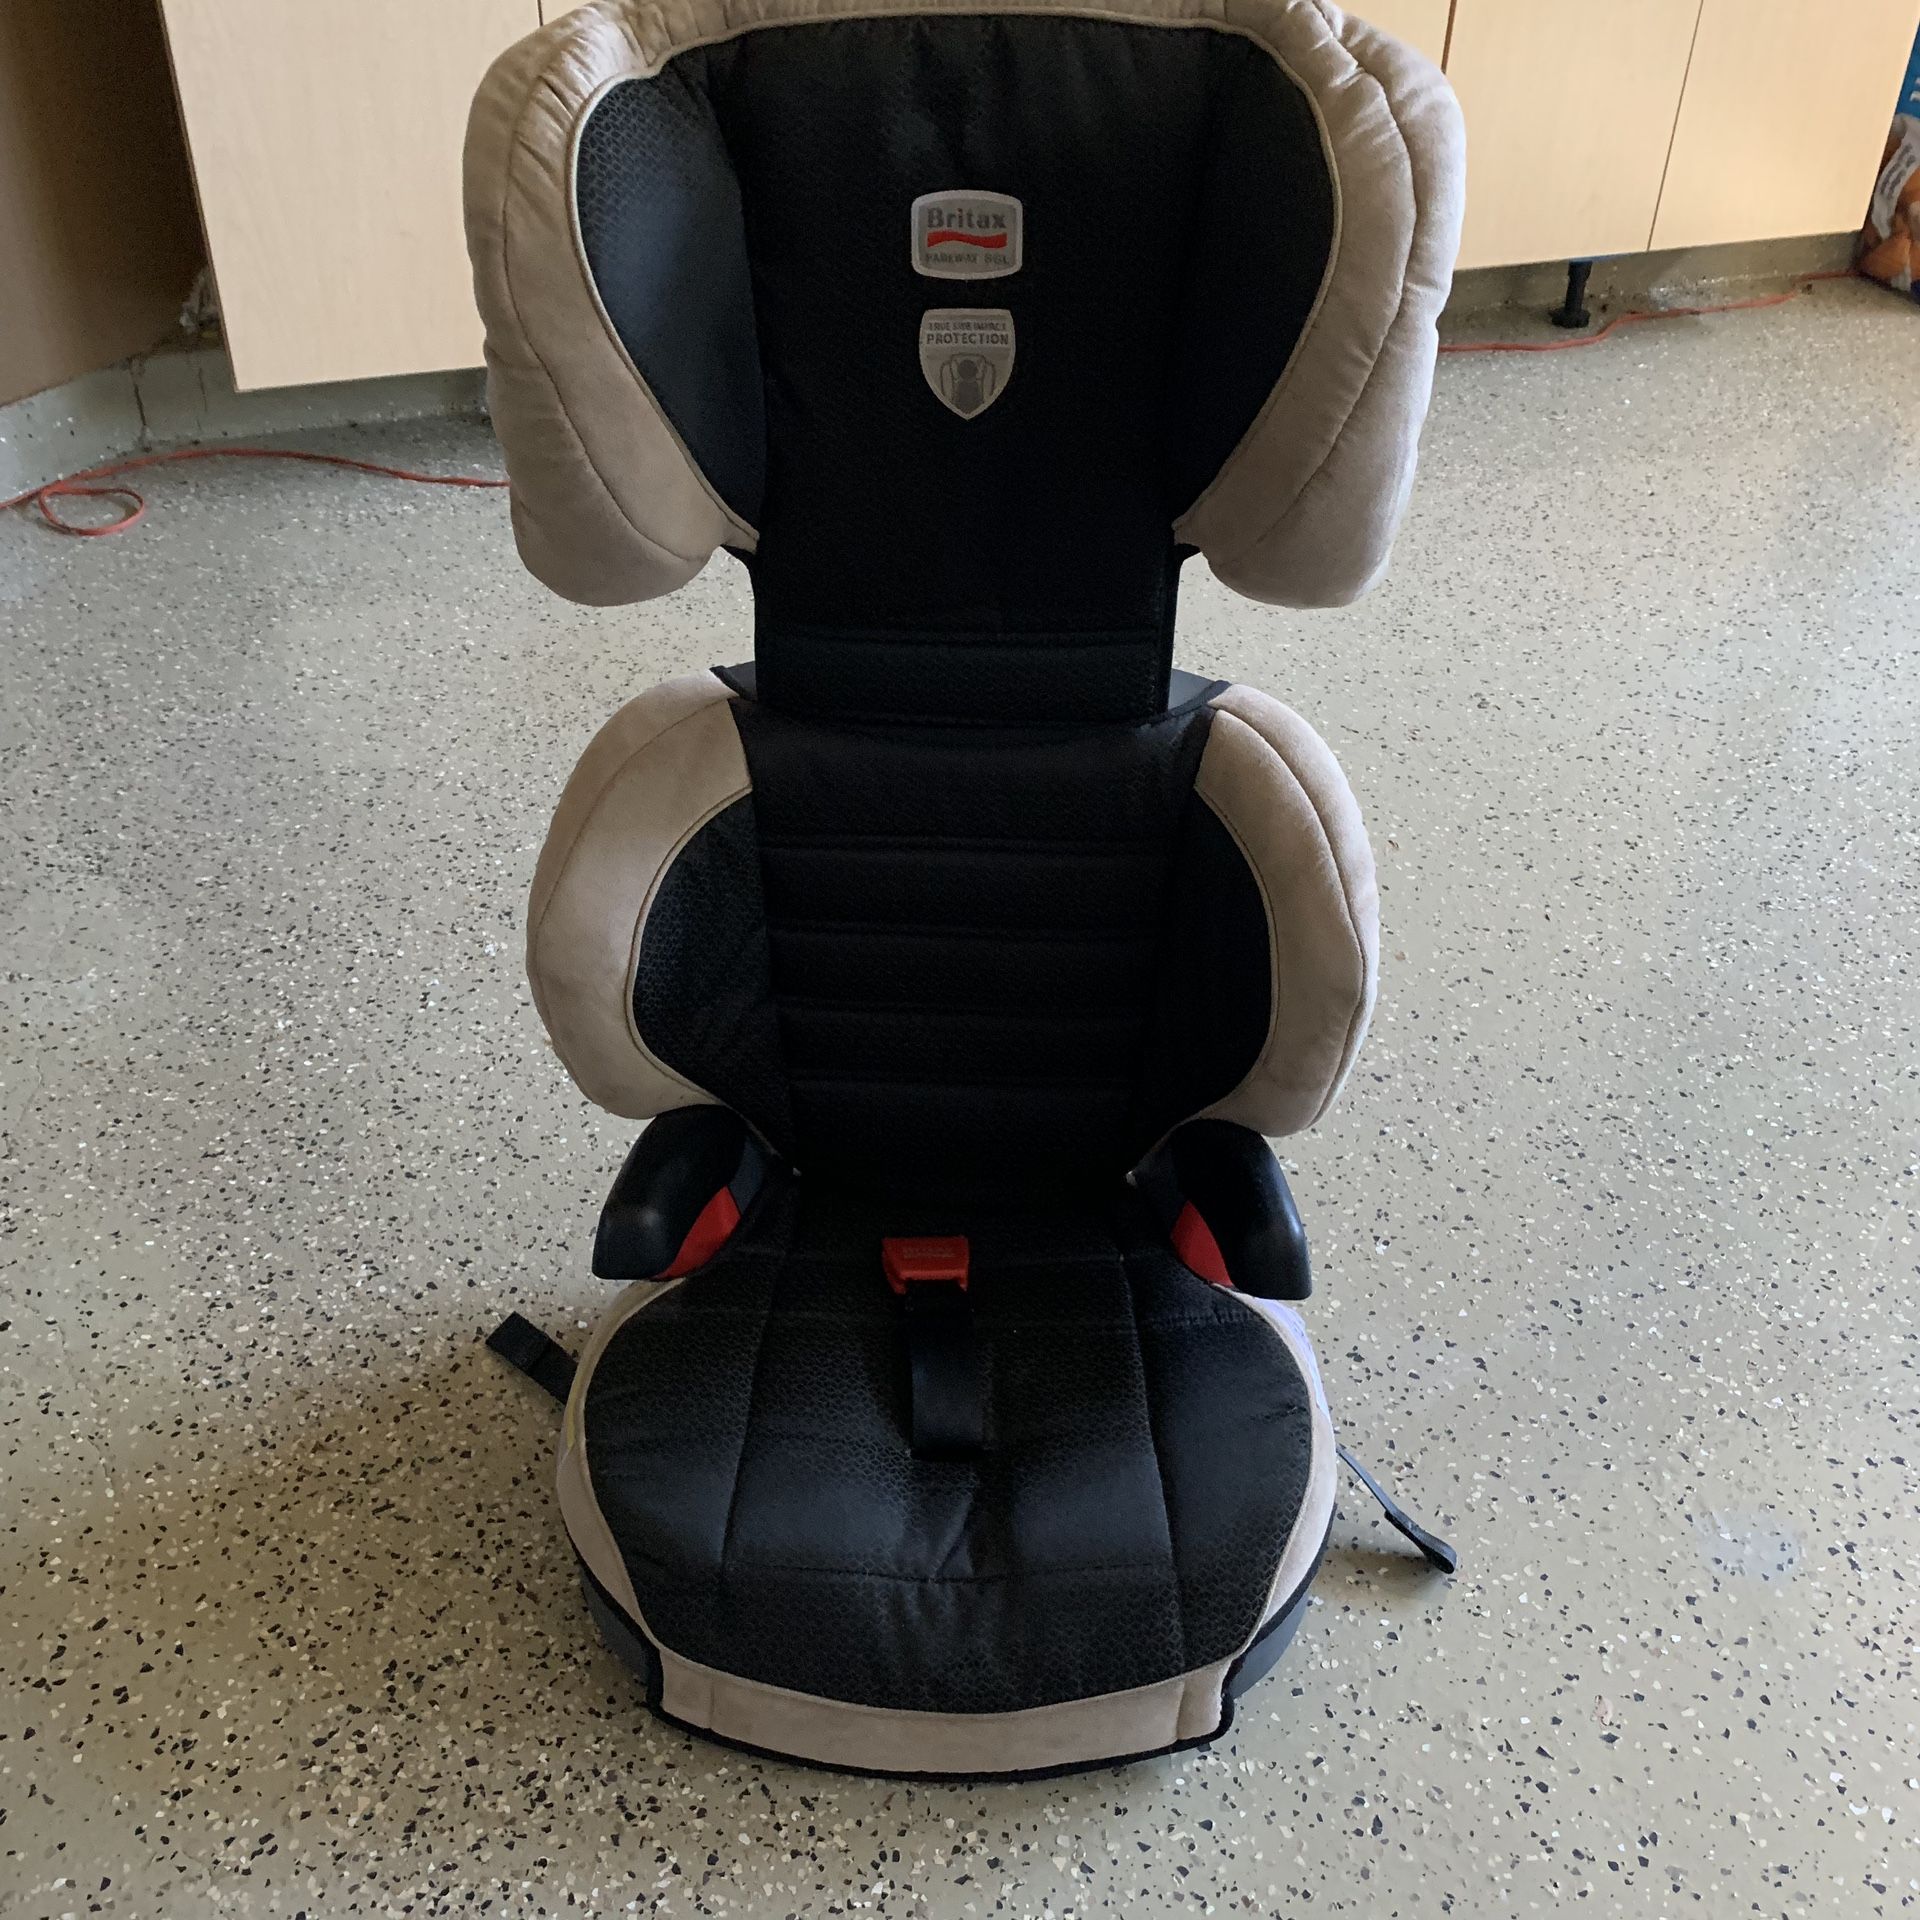 Britax Parkway Sgl booster seat with back